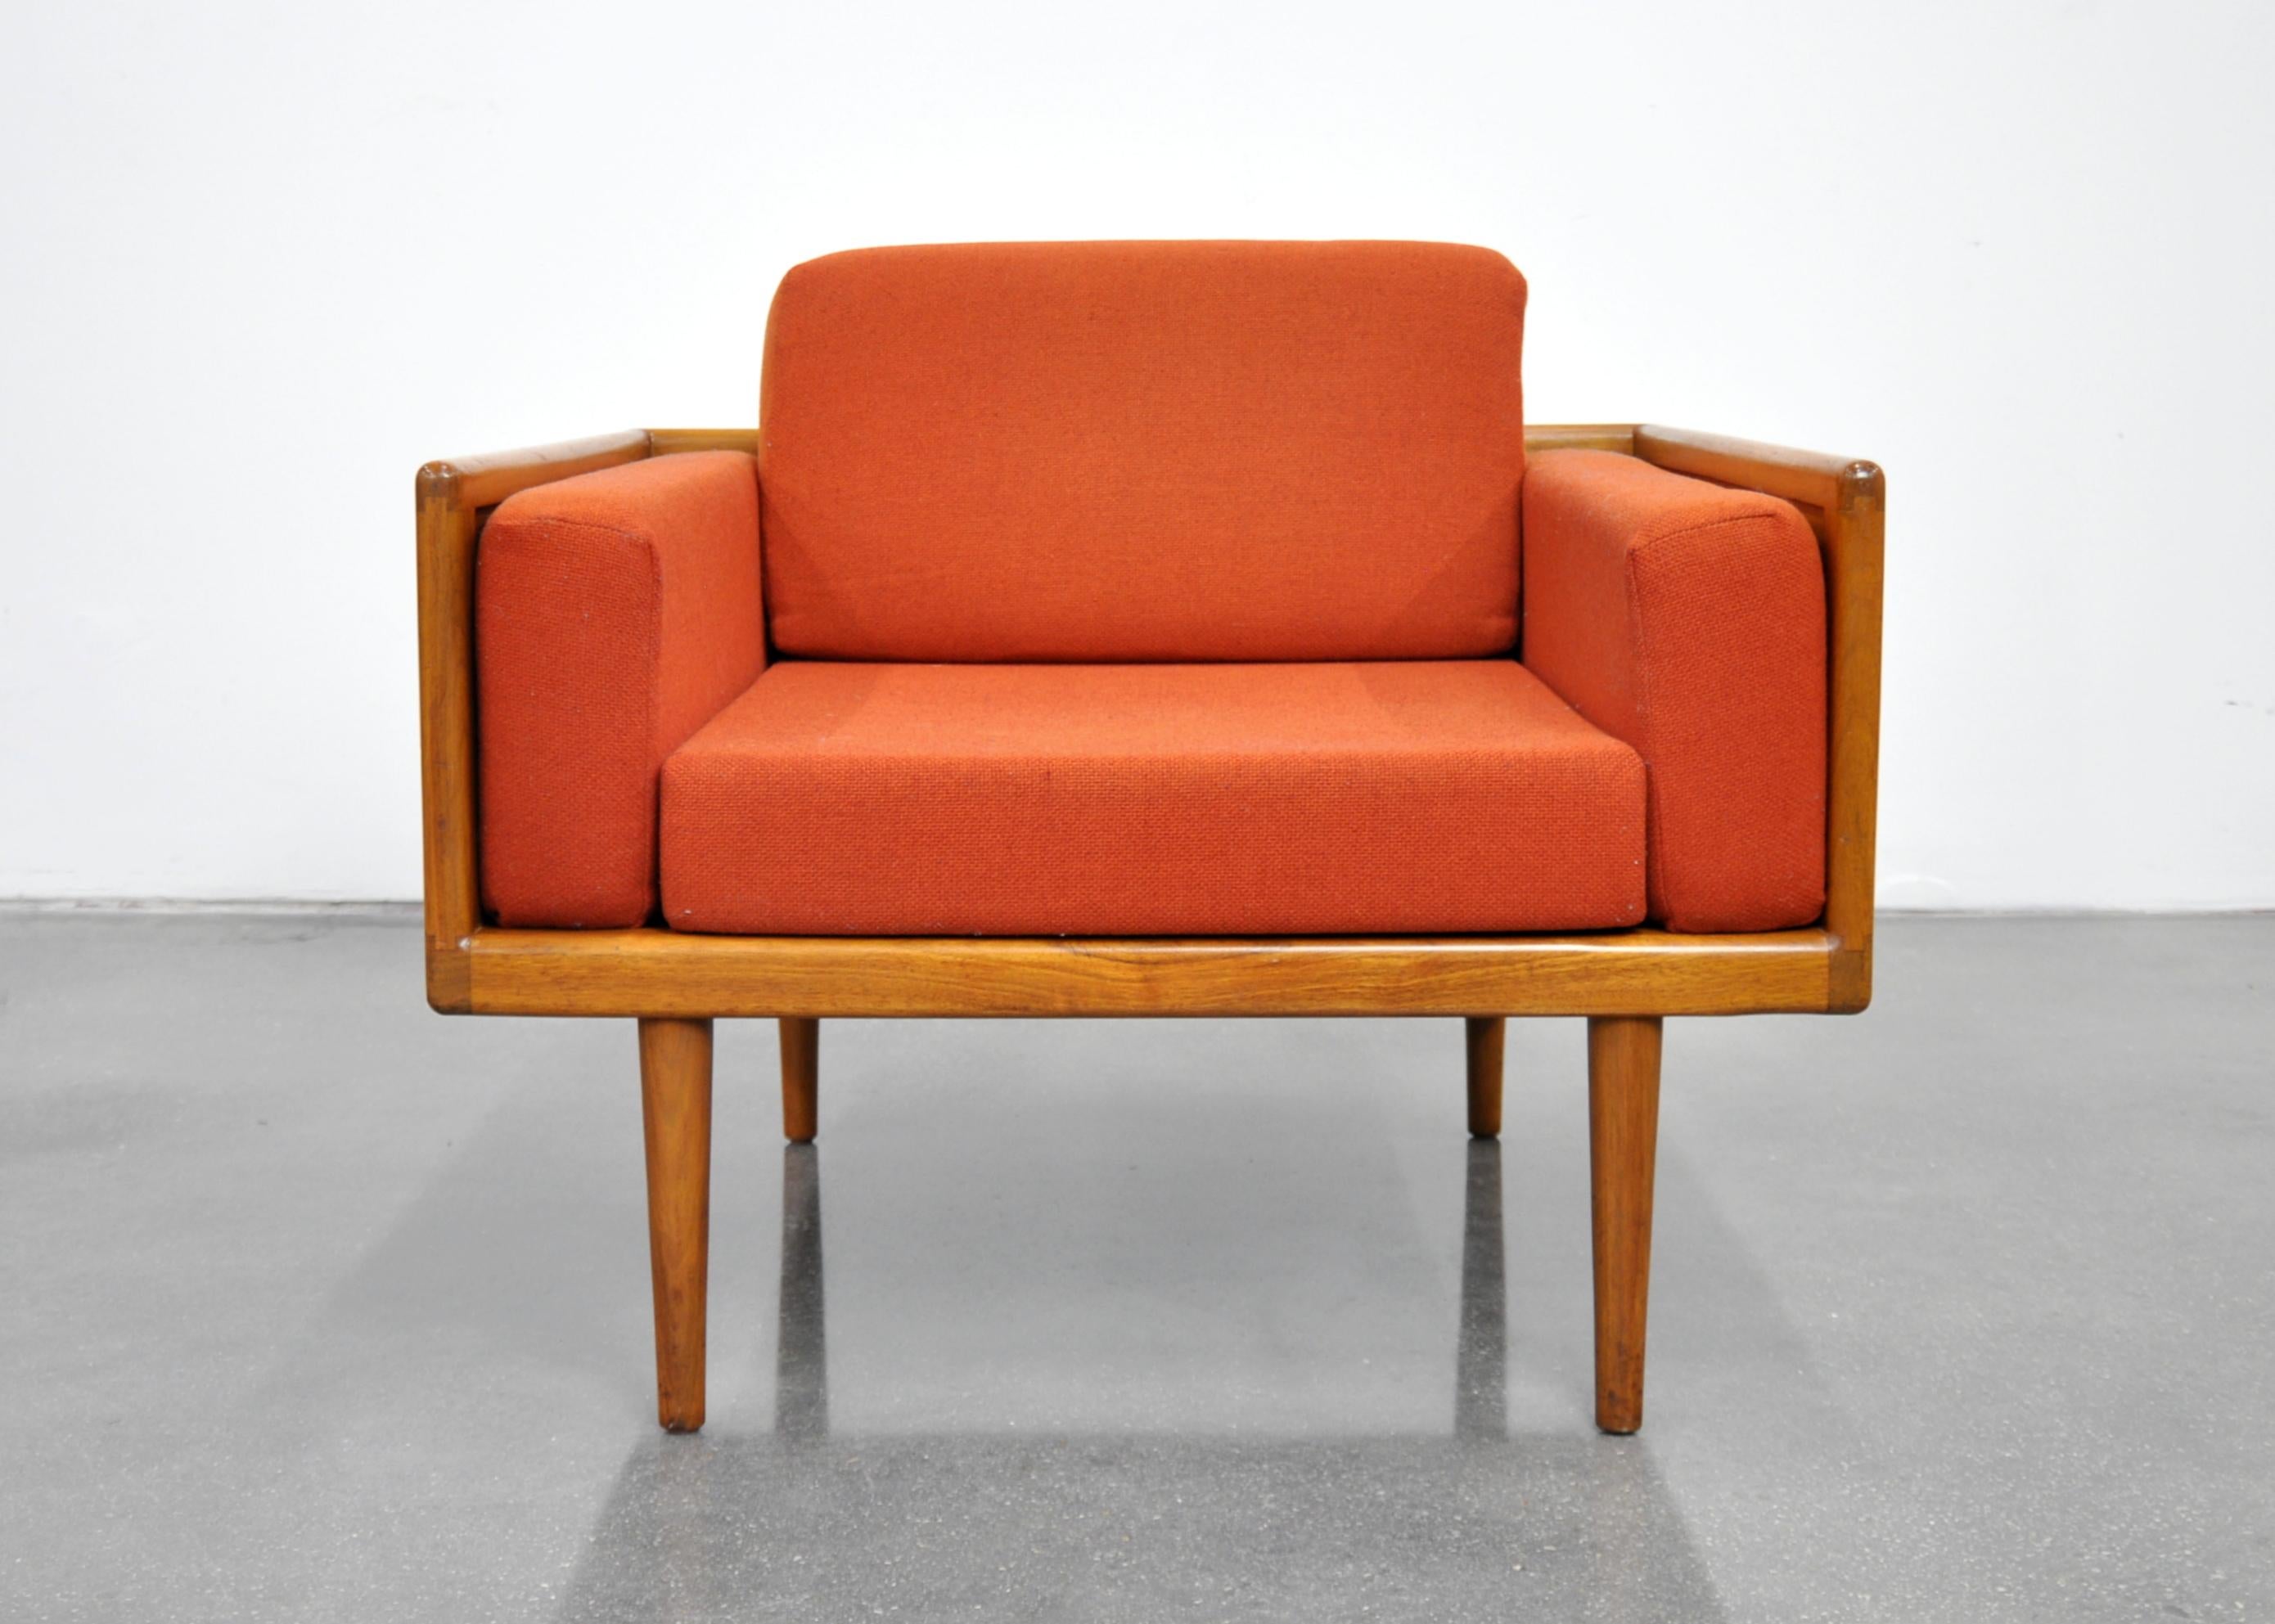 A gorgeous vintage Mid-Century Modern box armchair, designed by Mel Smilow for Smilow-Thielle, dating from the 1950s. The club chair features an exposed solid walnut case raised on slender tapered legs, imparting a Minimalist aesthetic to the